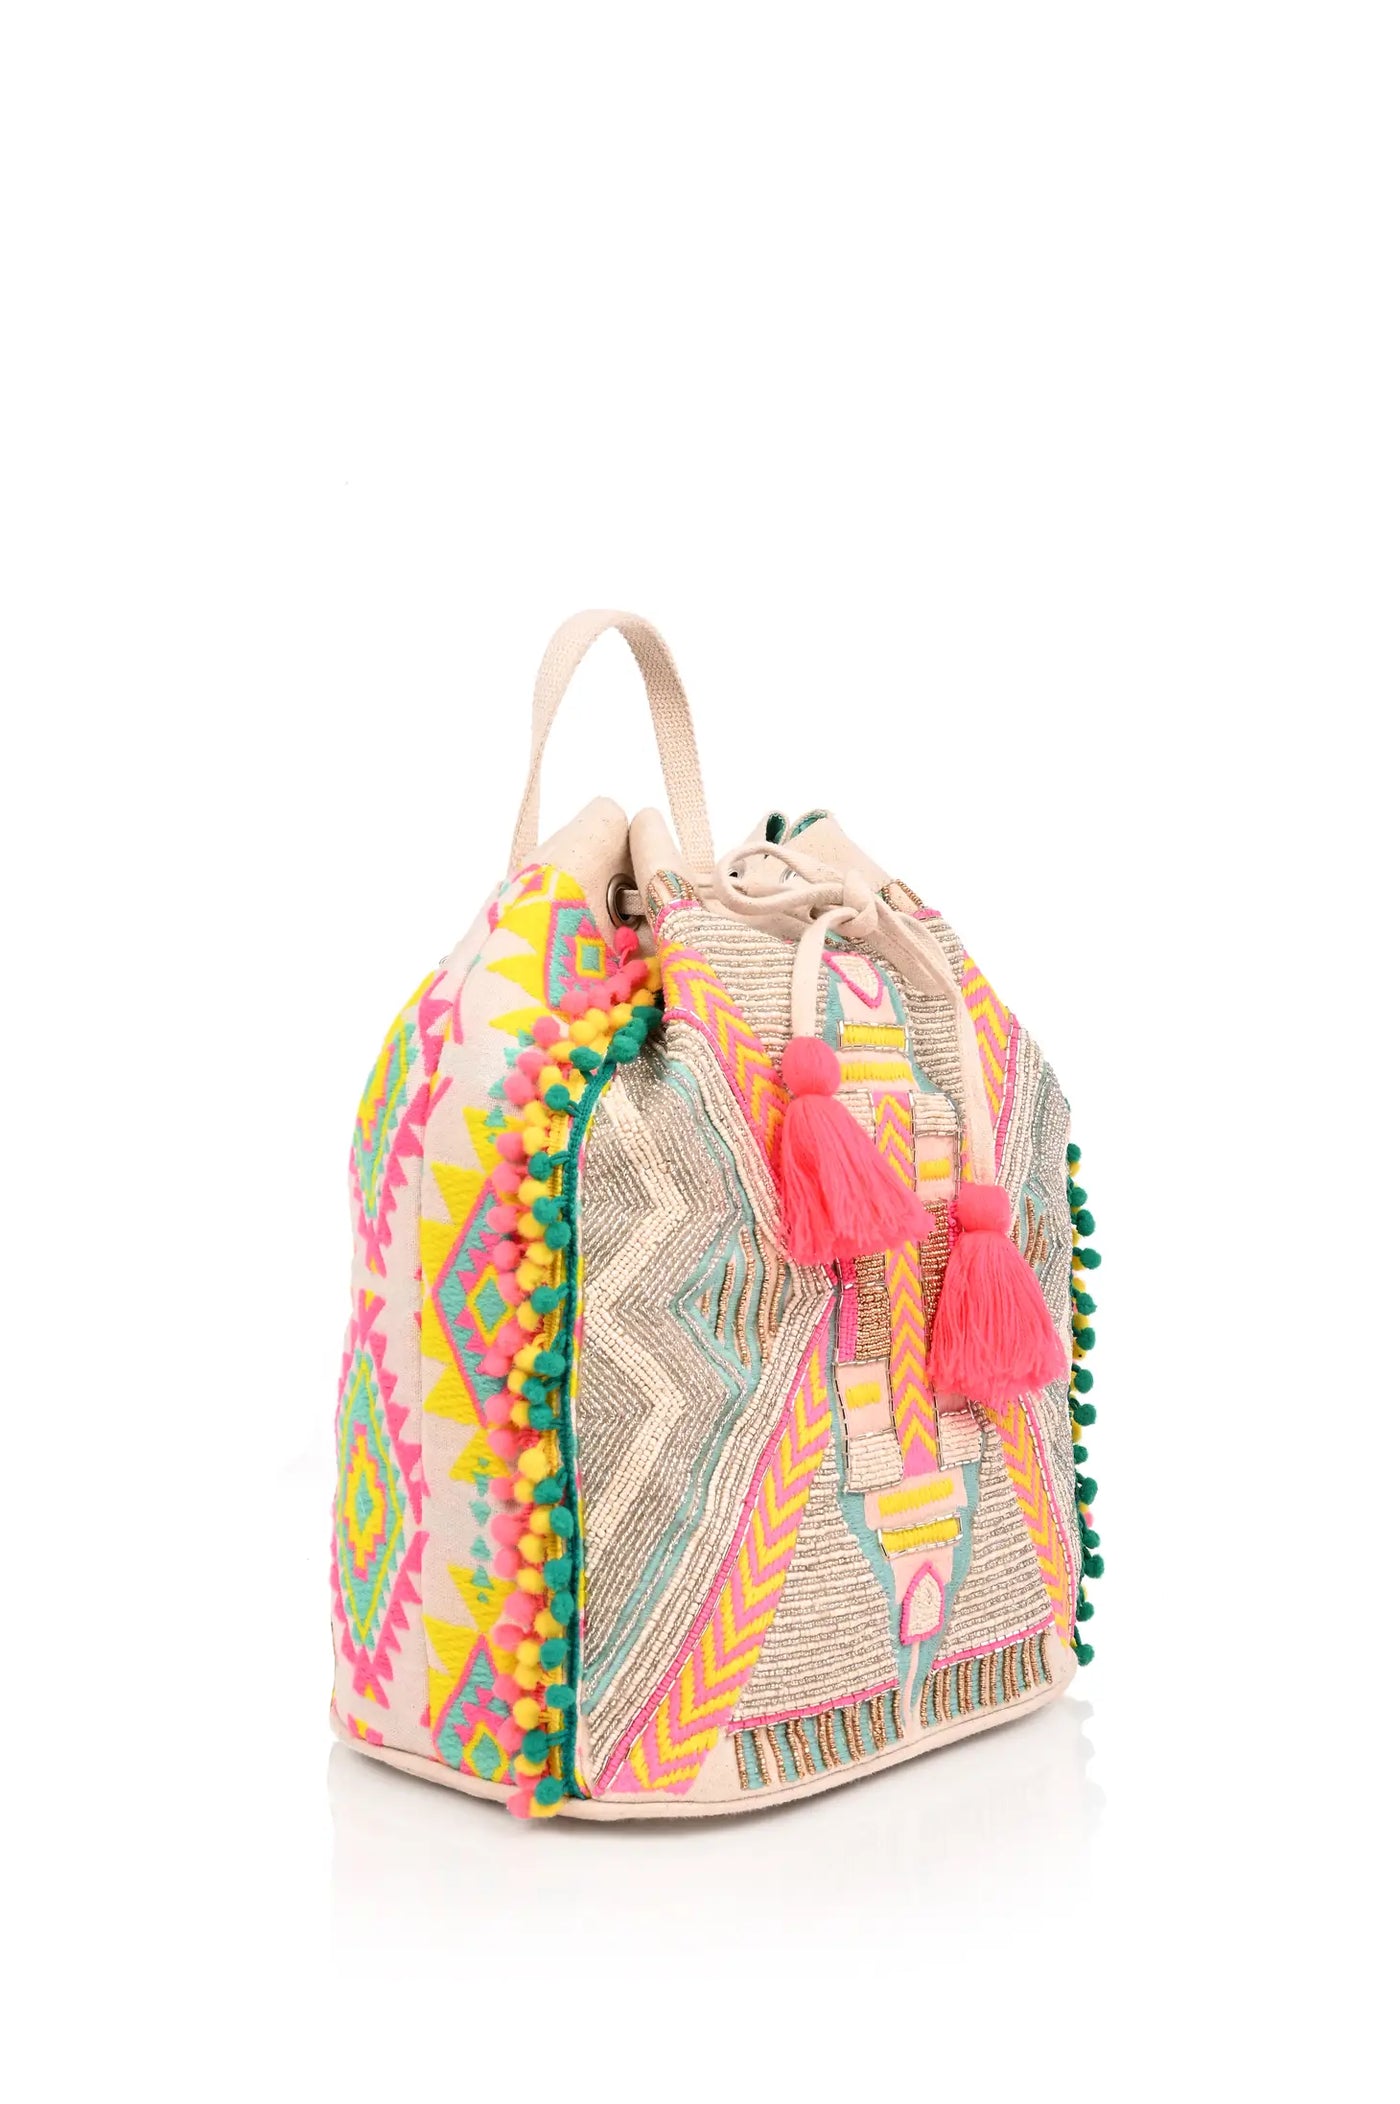 Be free-Aztec Backpack